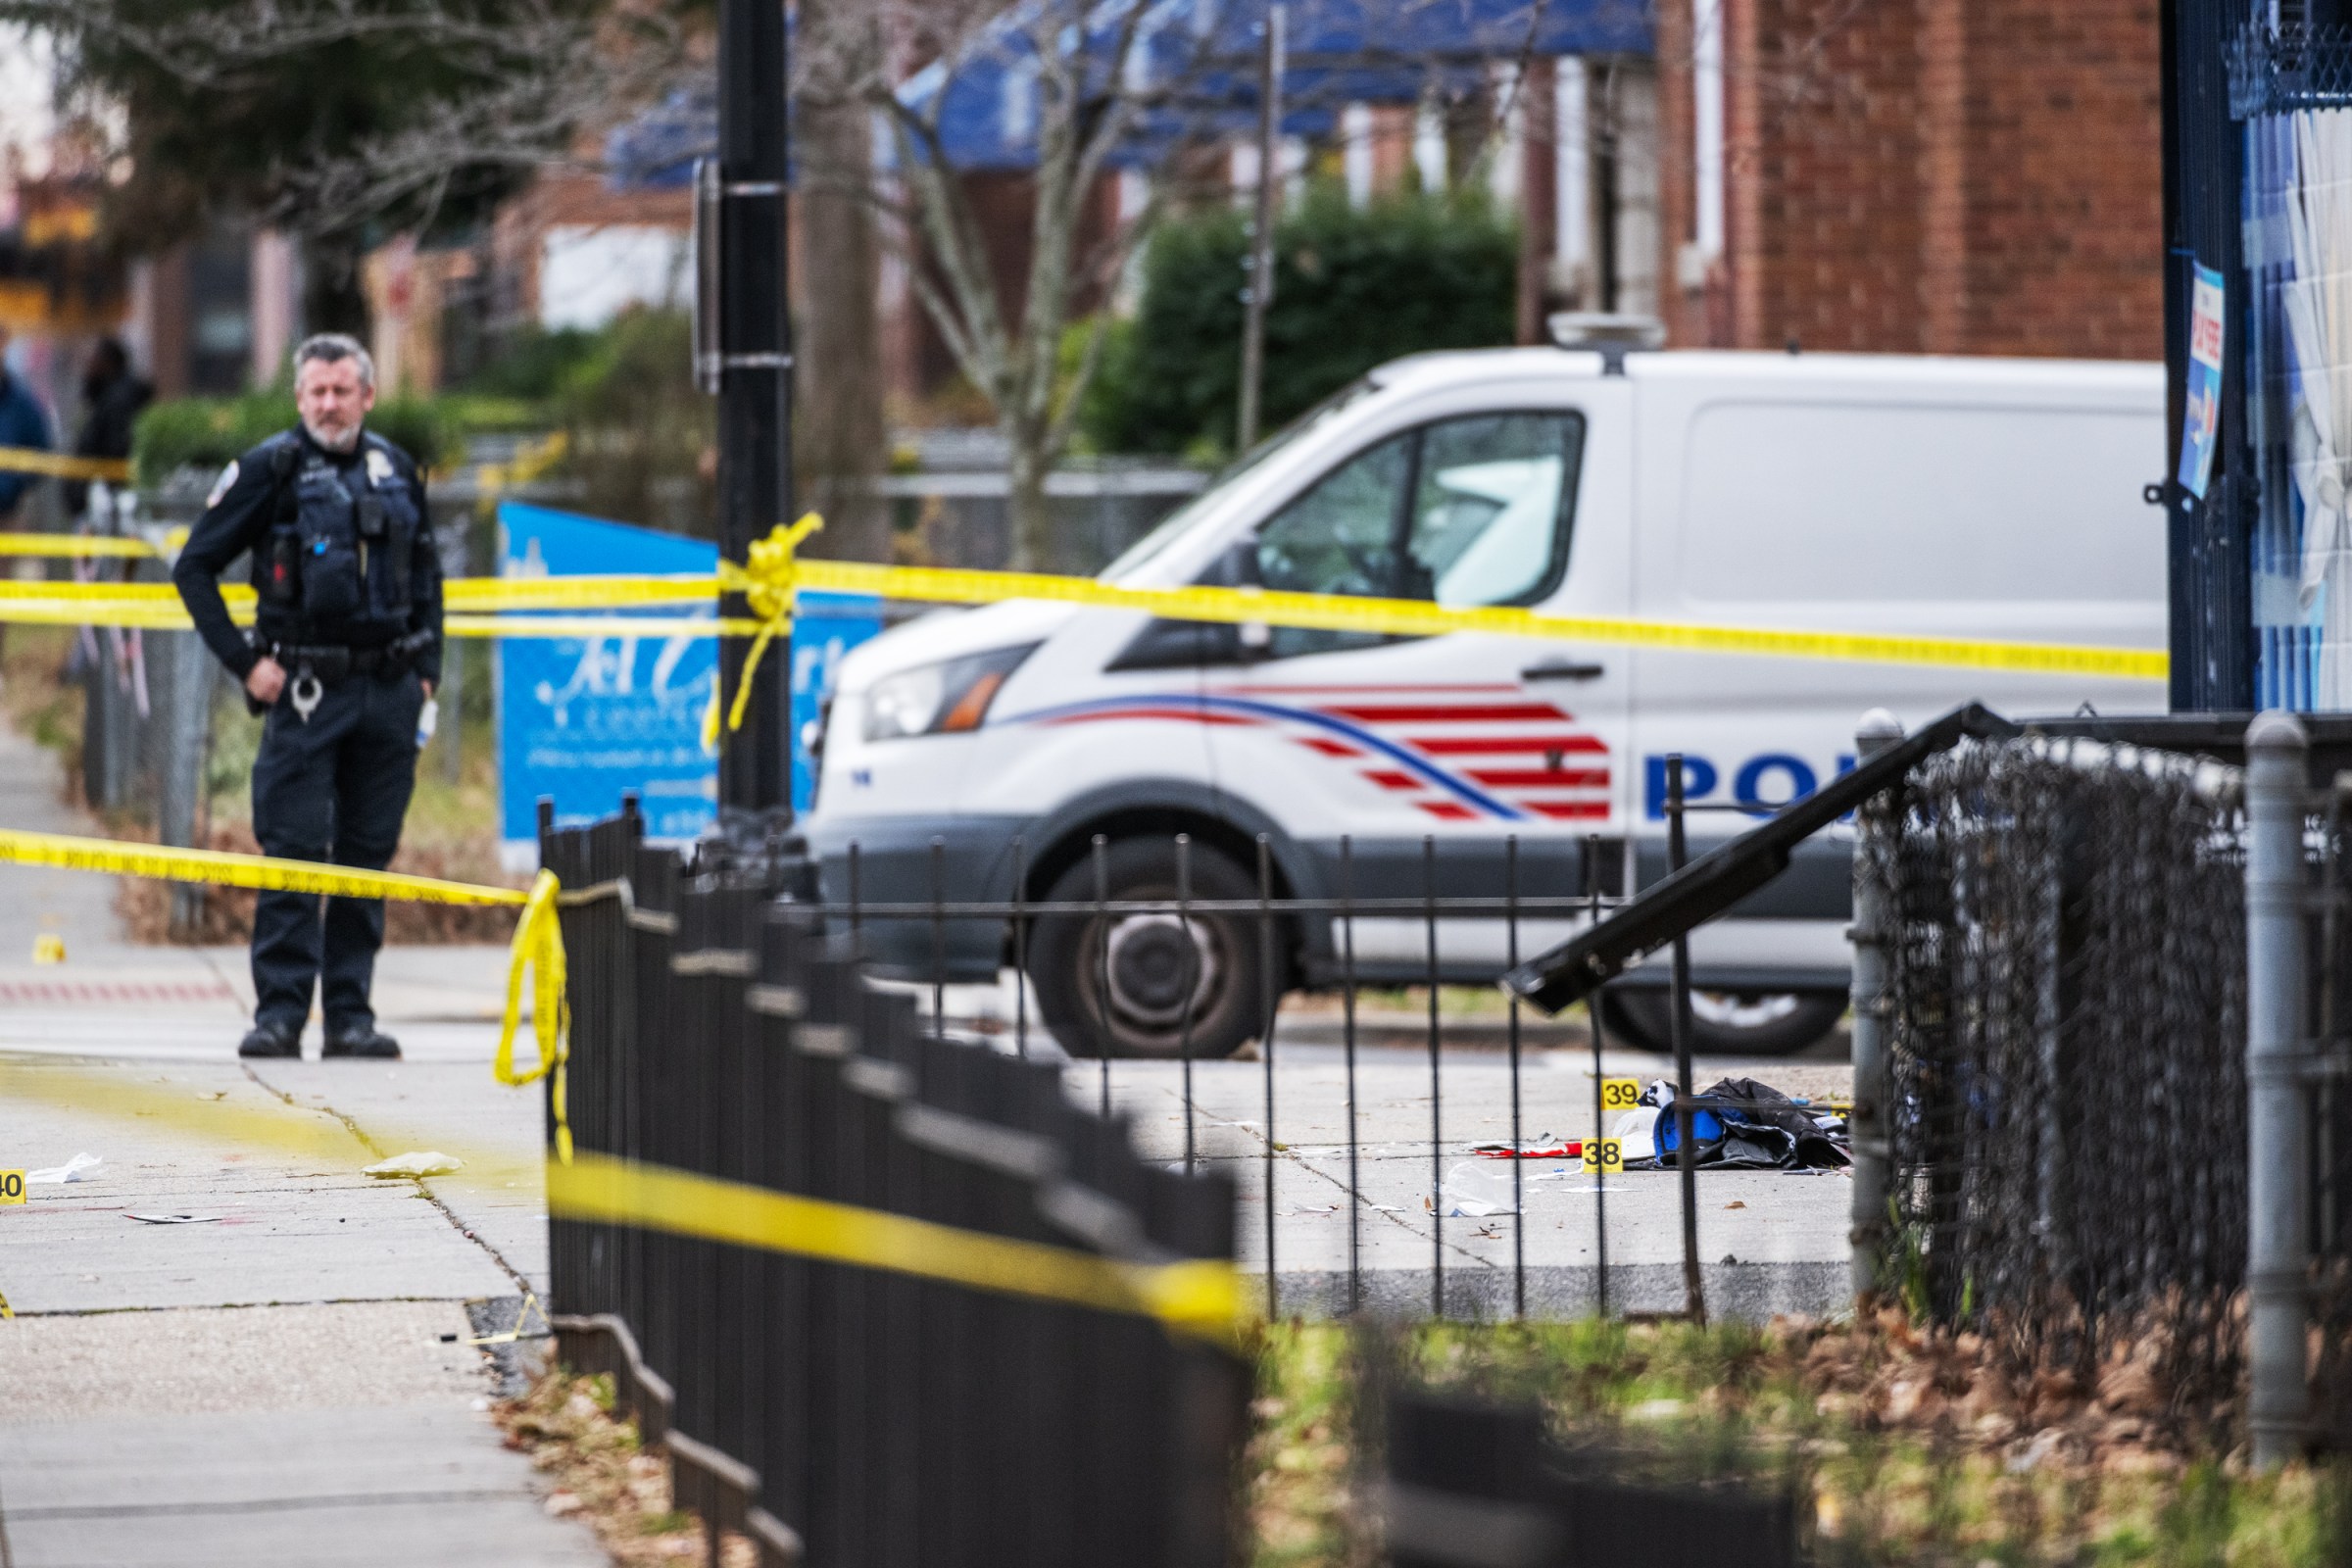 How the nation’s capital became an outlier on violent crime